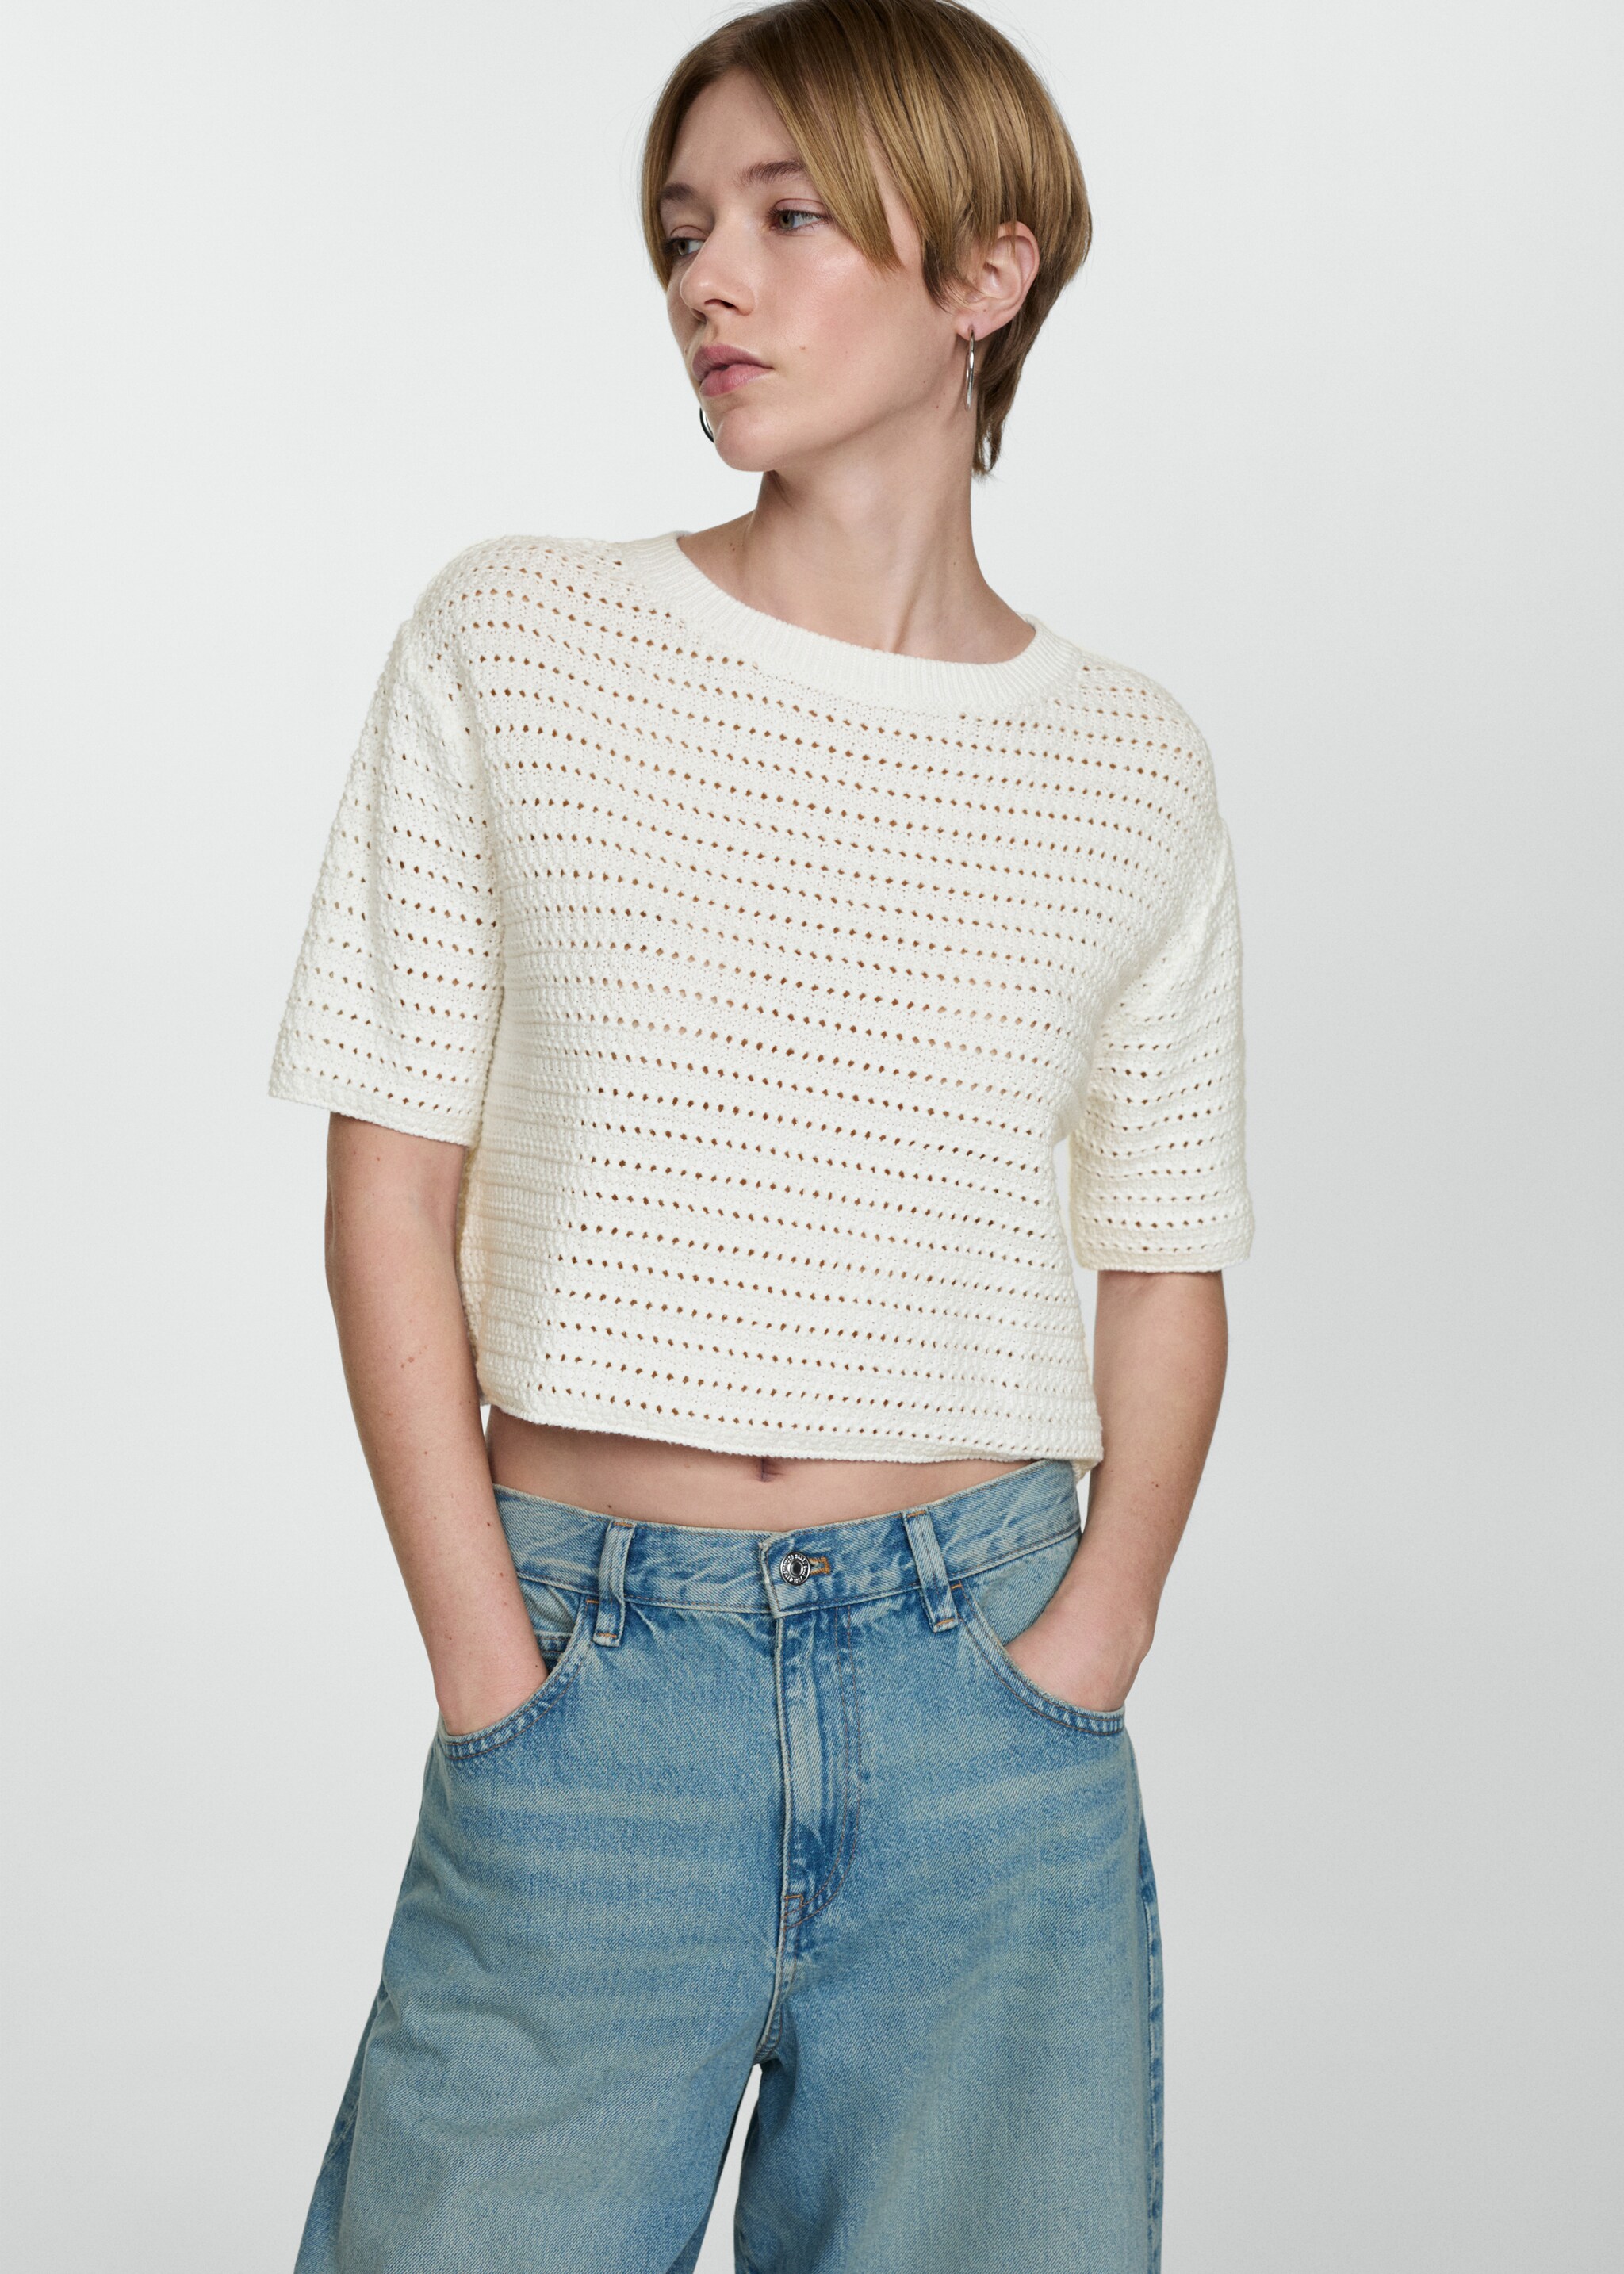 Knitted sweater with openwork details - Medium plane